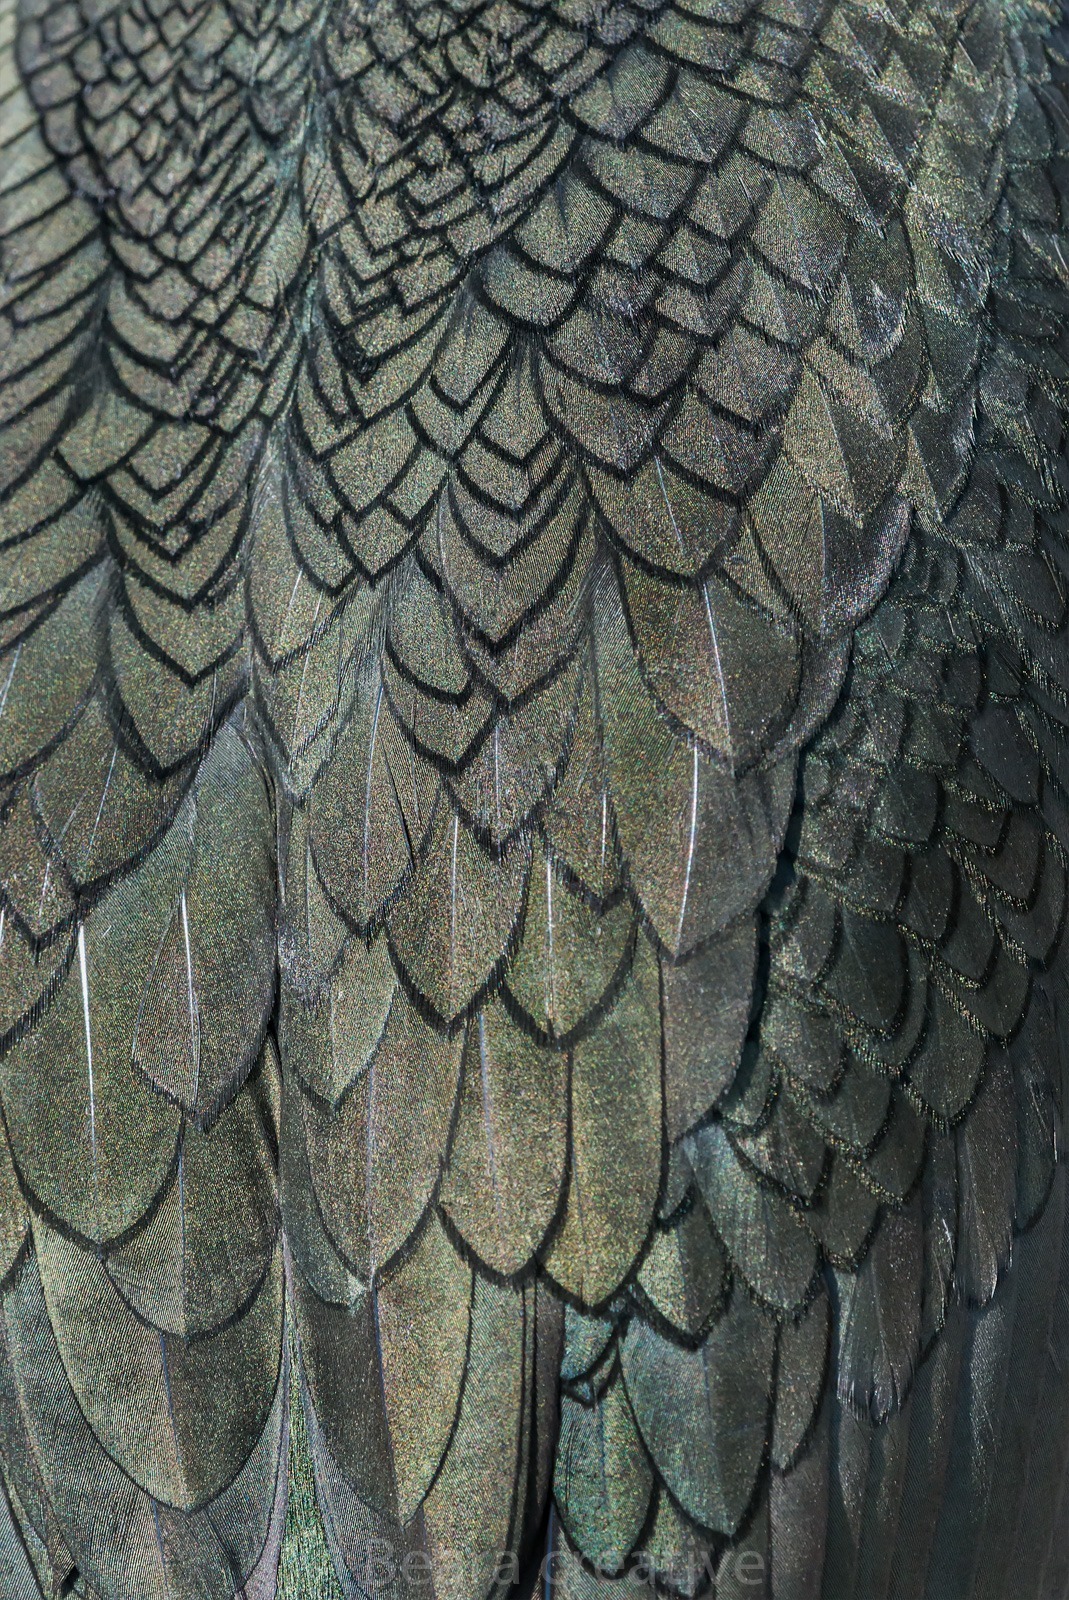 Feather textures